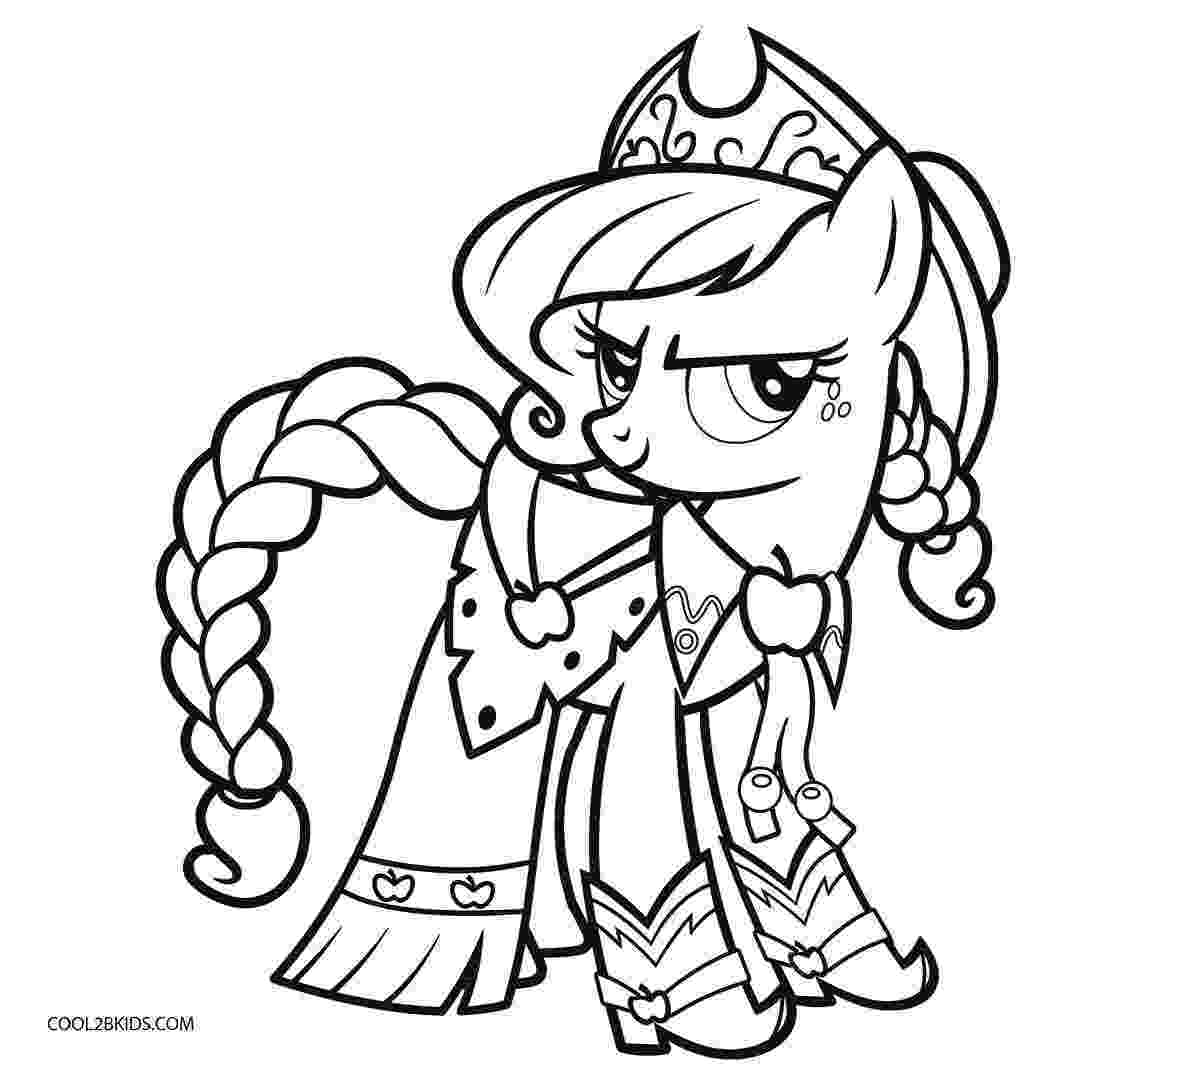 coloring pages of my little pony my little pony coloring pages minister coloring pony my coloring little pages of 